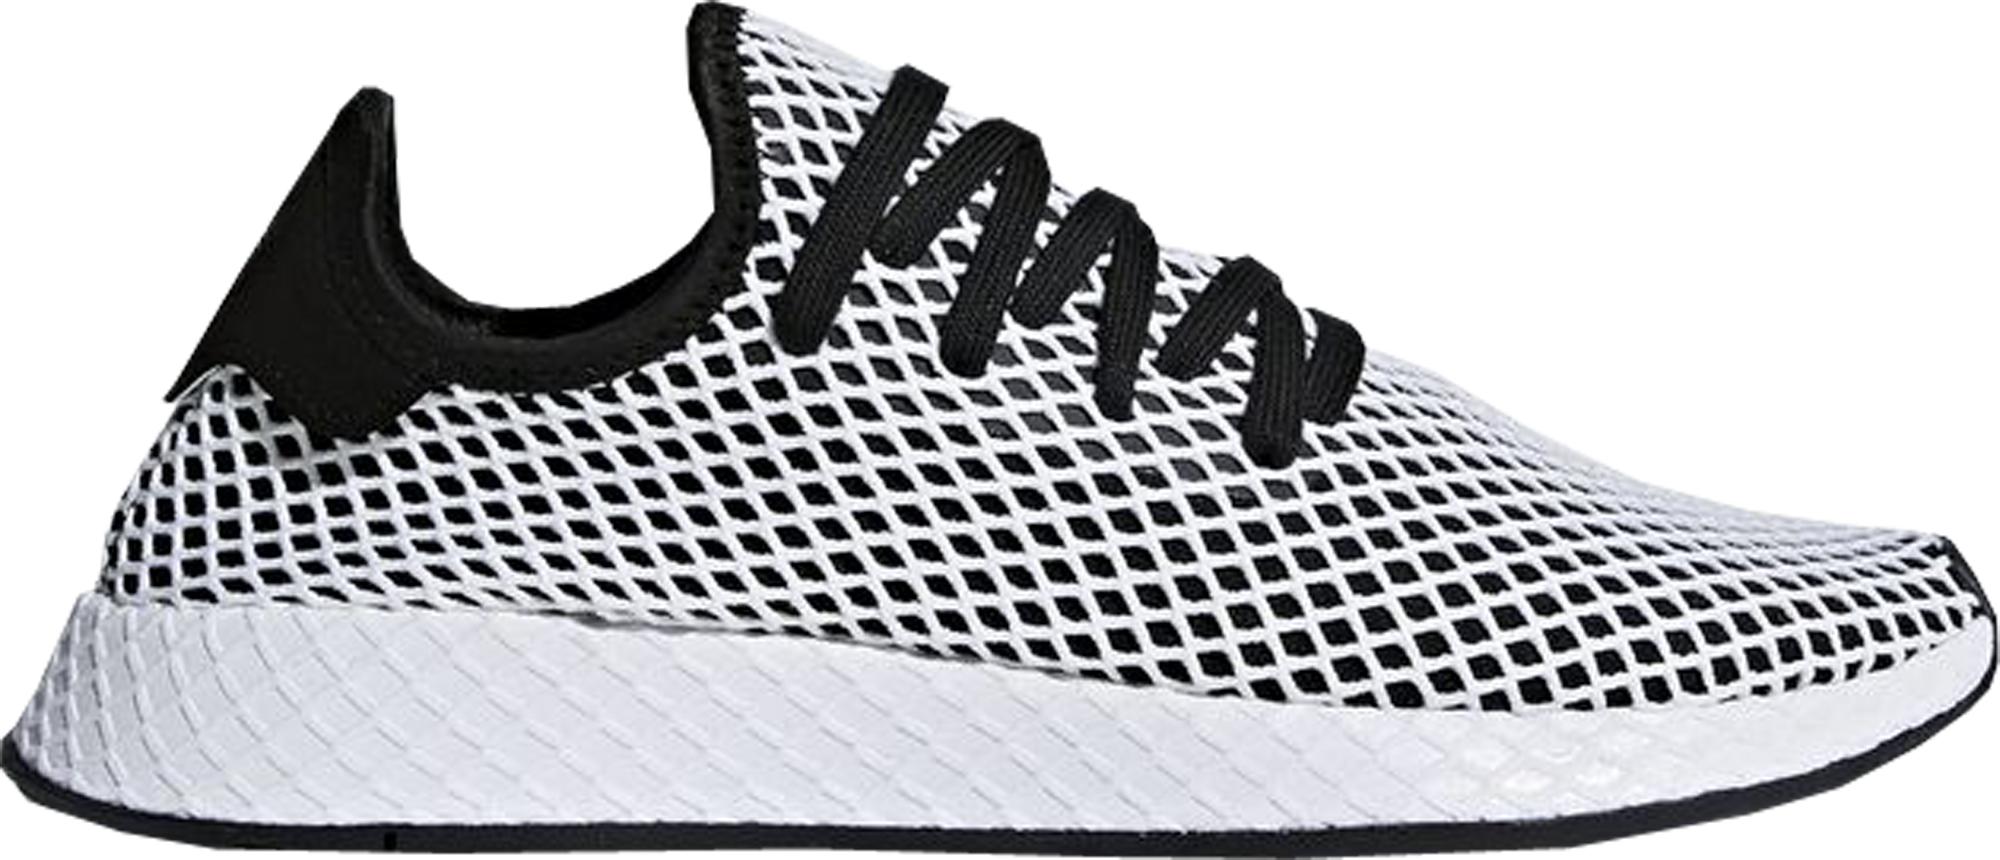 adidas deerupt black and white